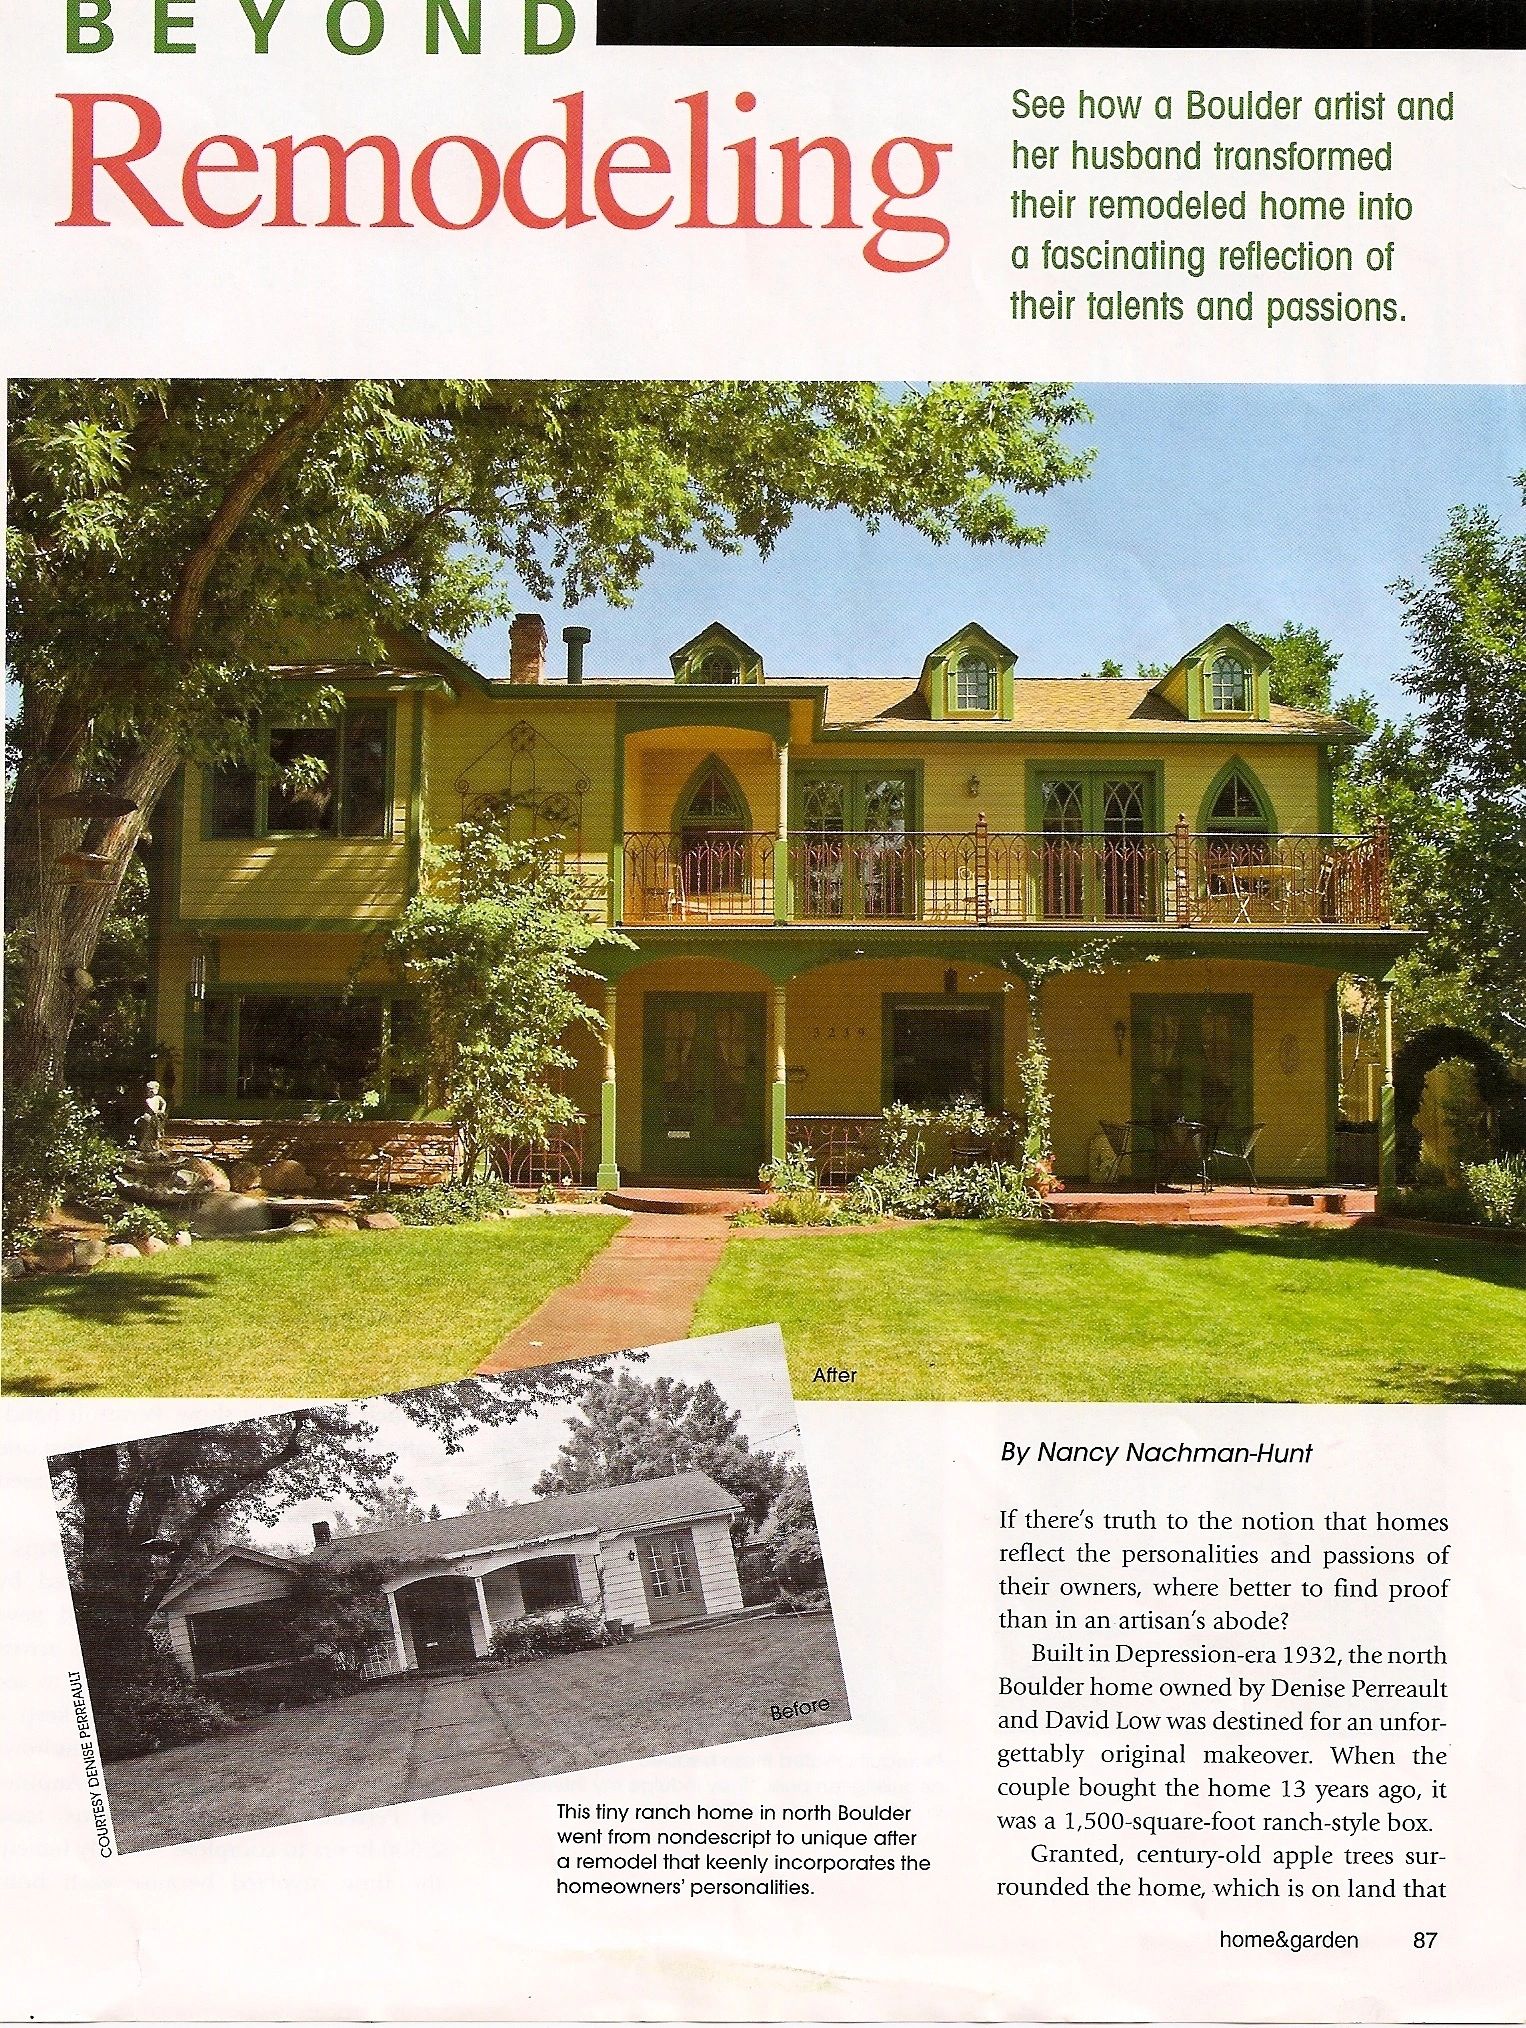 Boulder Home & Garden Magazine article, featuring Denise's site-specific art created for her home.